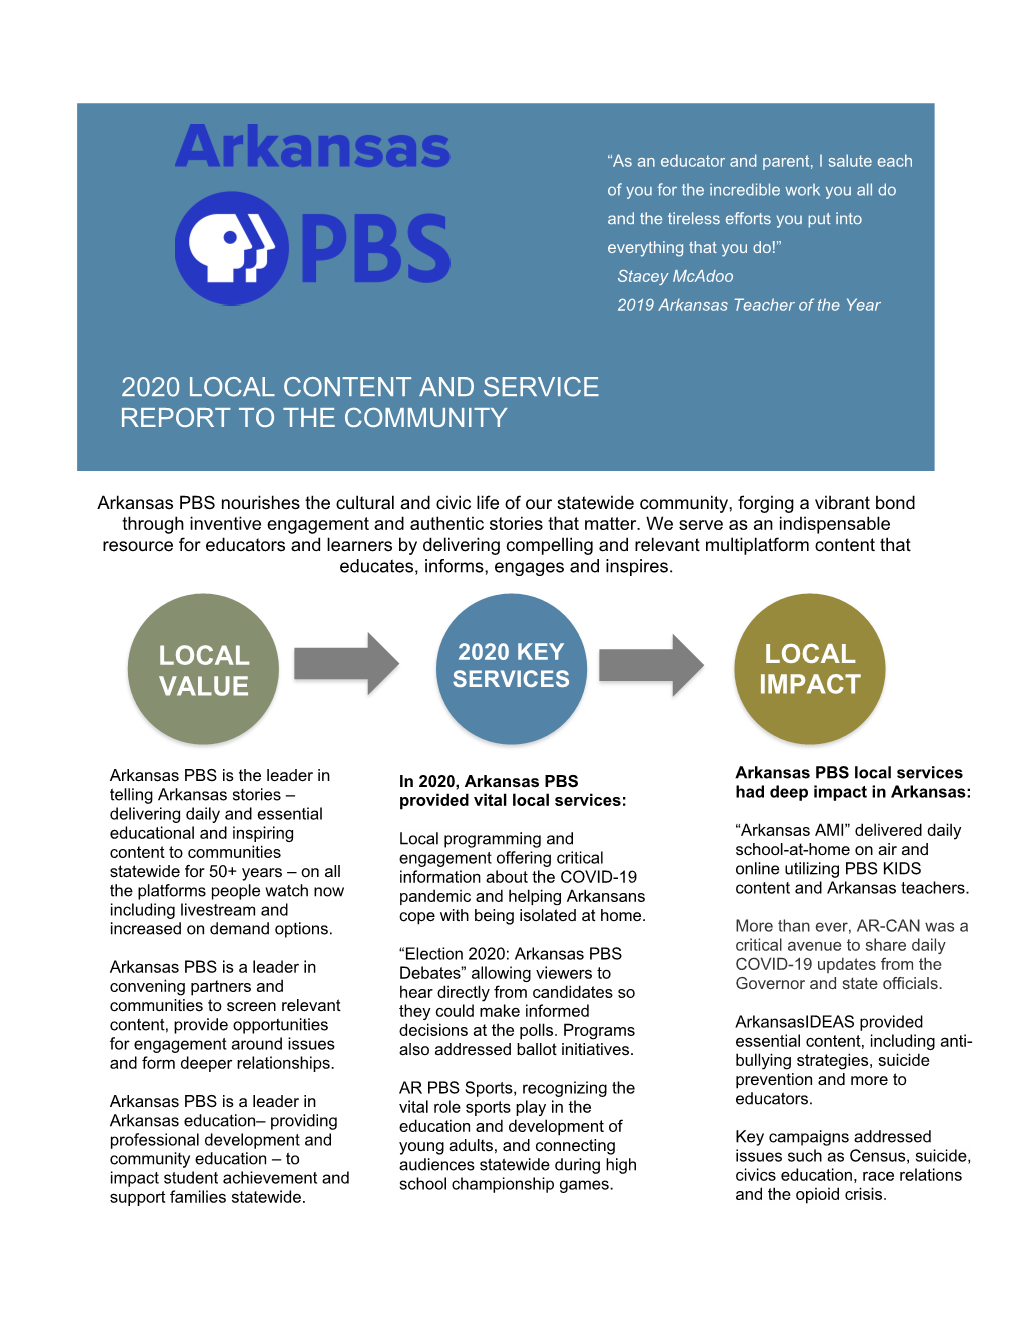 AR PBS FY 2020 Local-Content and Service Report FINAL